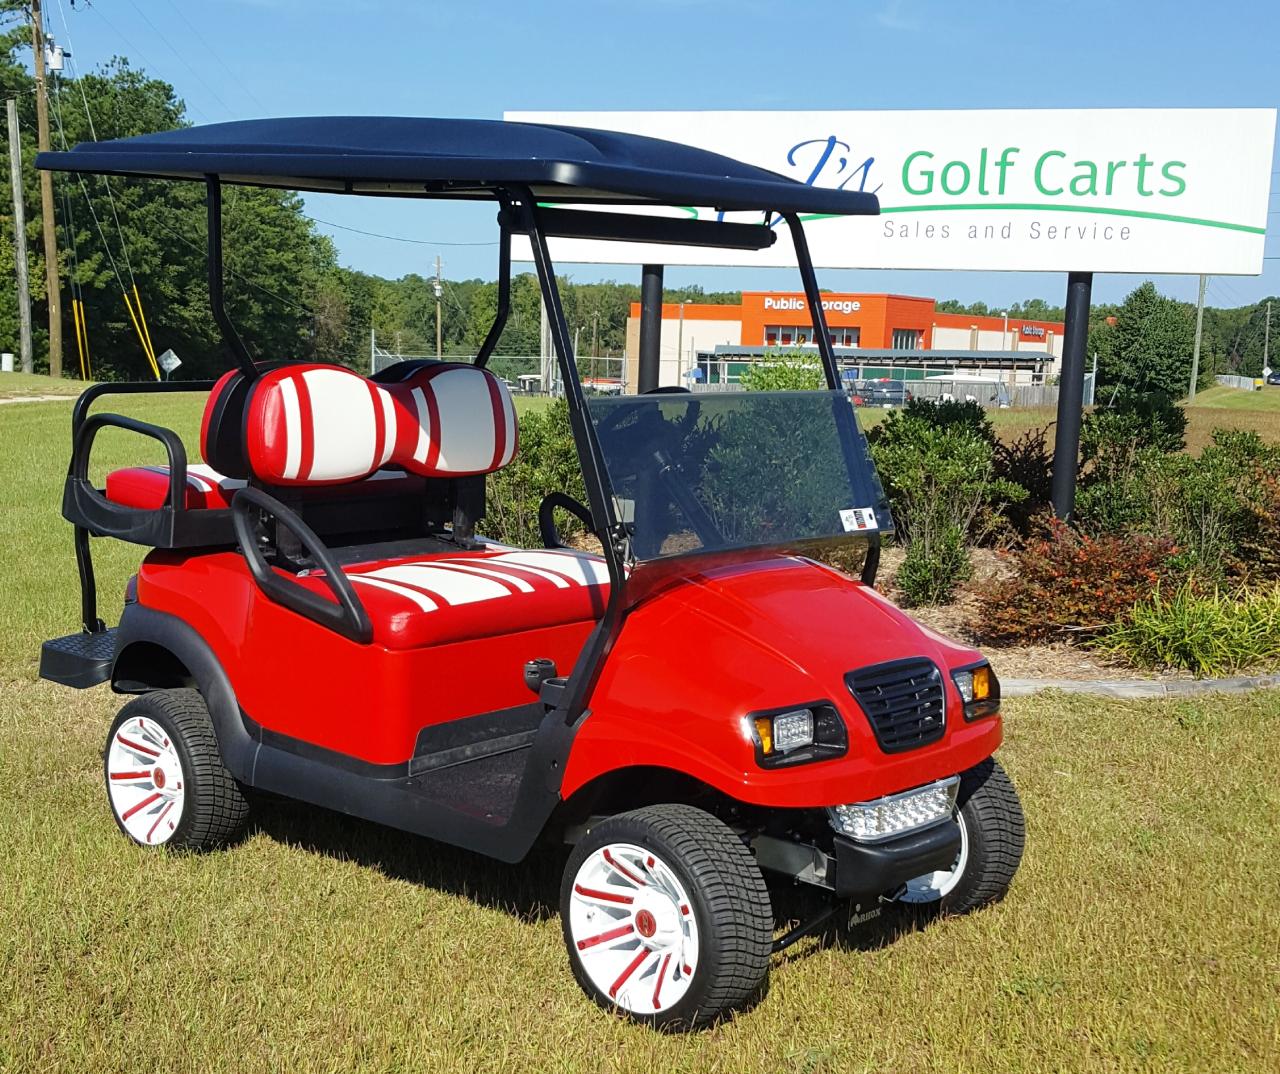 Find Your Perfect Ride: Used Golf Carts for Sale by Owner in Kaufman, Texas